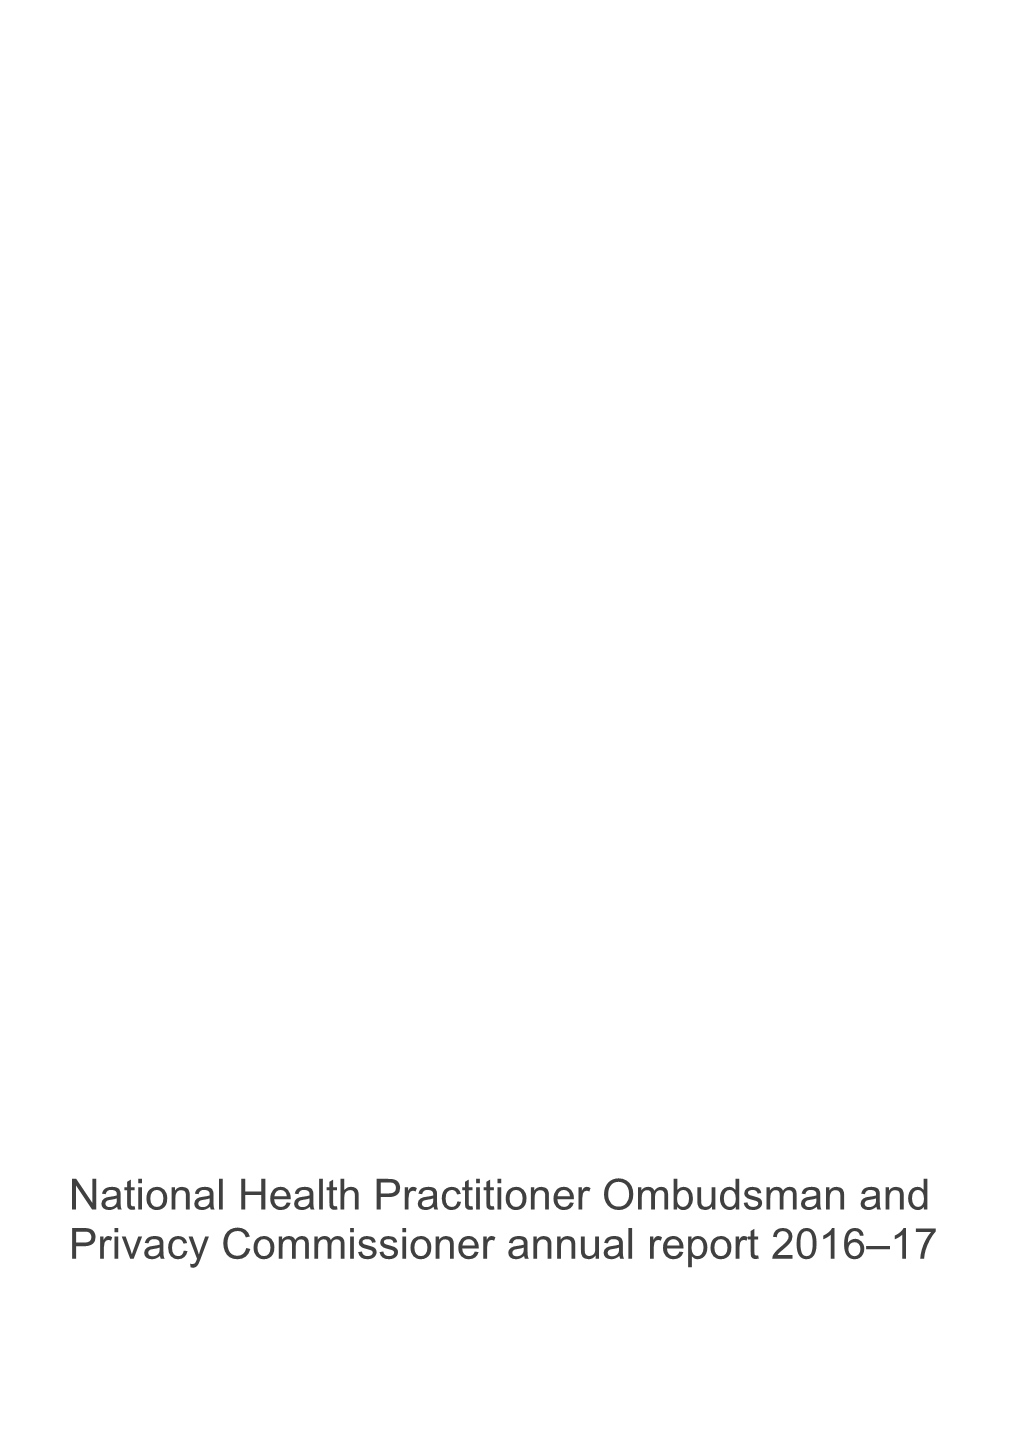 National Health Practitioner Ombudsman and Privacy Commissioner Annual Report 2016 171